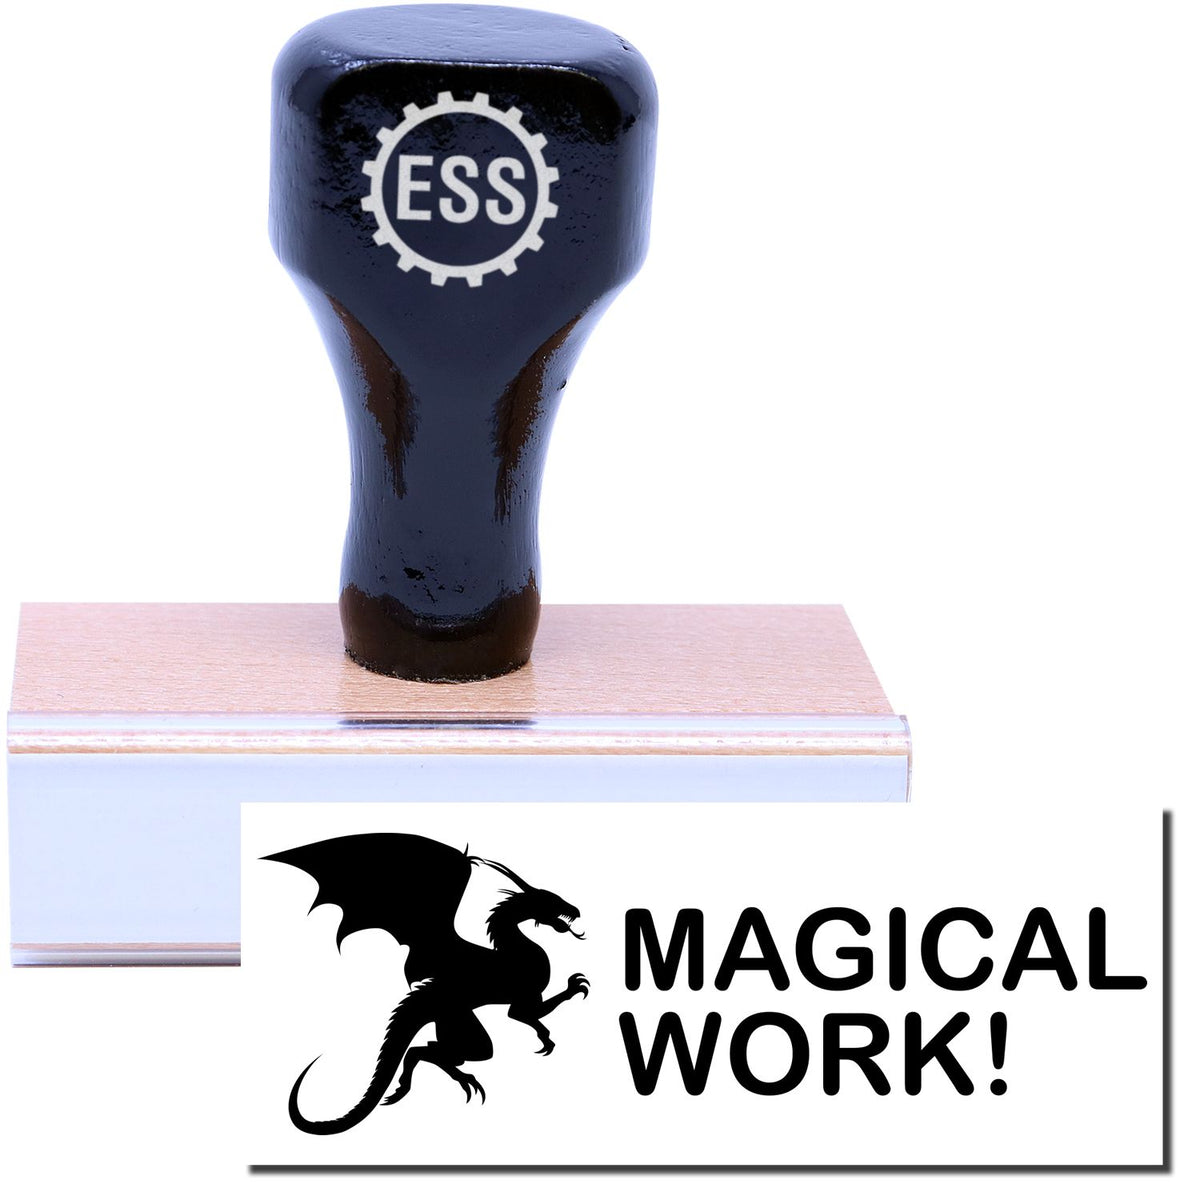 A stock office rubber stamp with a stamped image showing how the text &quot;MAGICAL WORK!&quot; in a large font with an icon of a dragon on the left side is displayed after stamping.